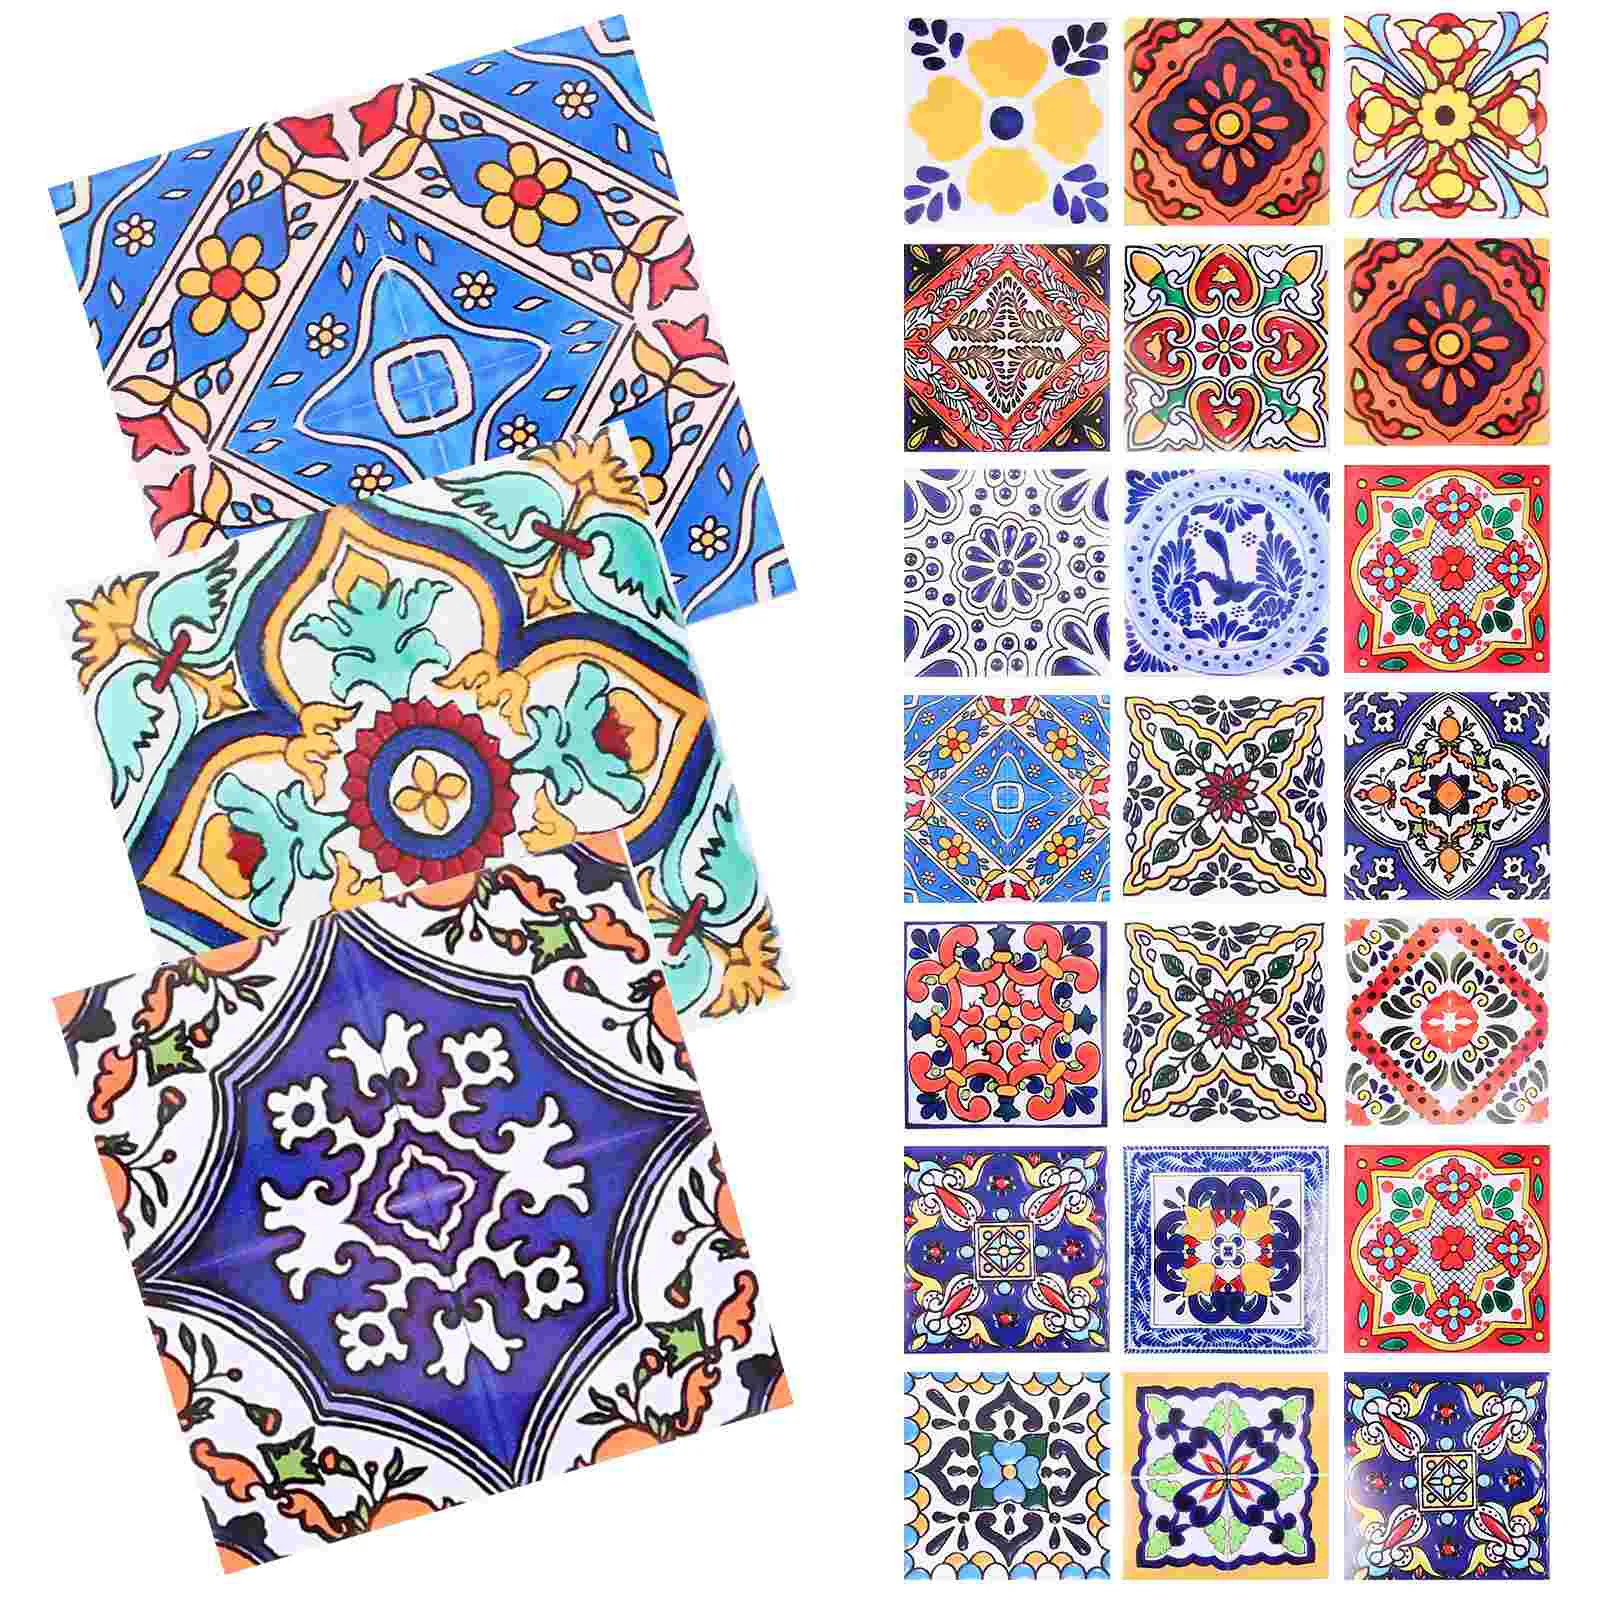 

Vintage Self-adhesive Tile Decals Wall Stickers Mandala Tiles Decals Decorative Wall Decals